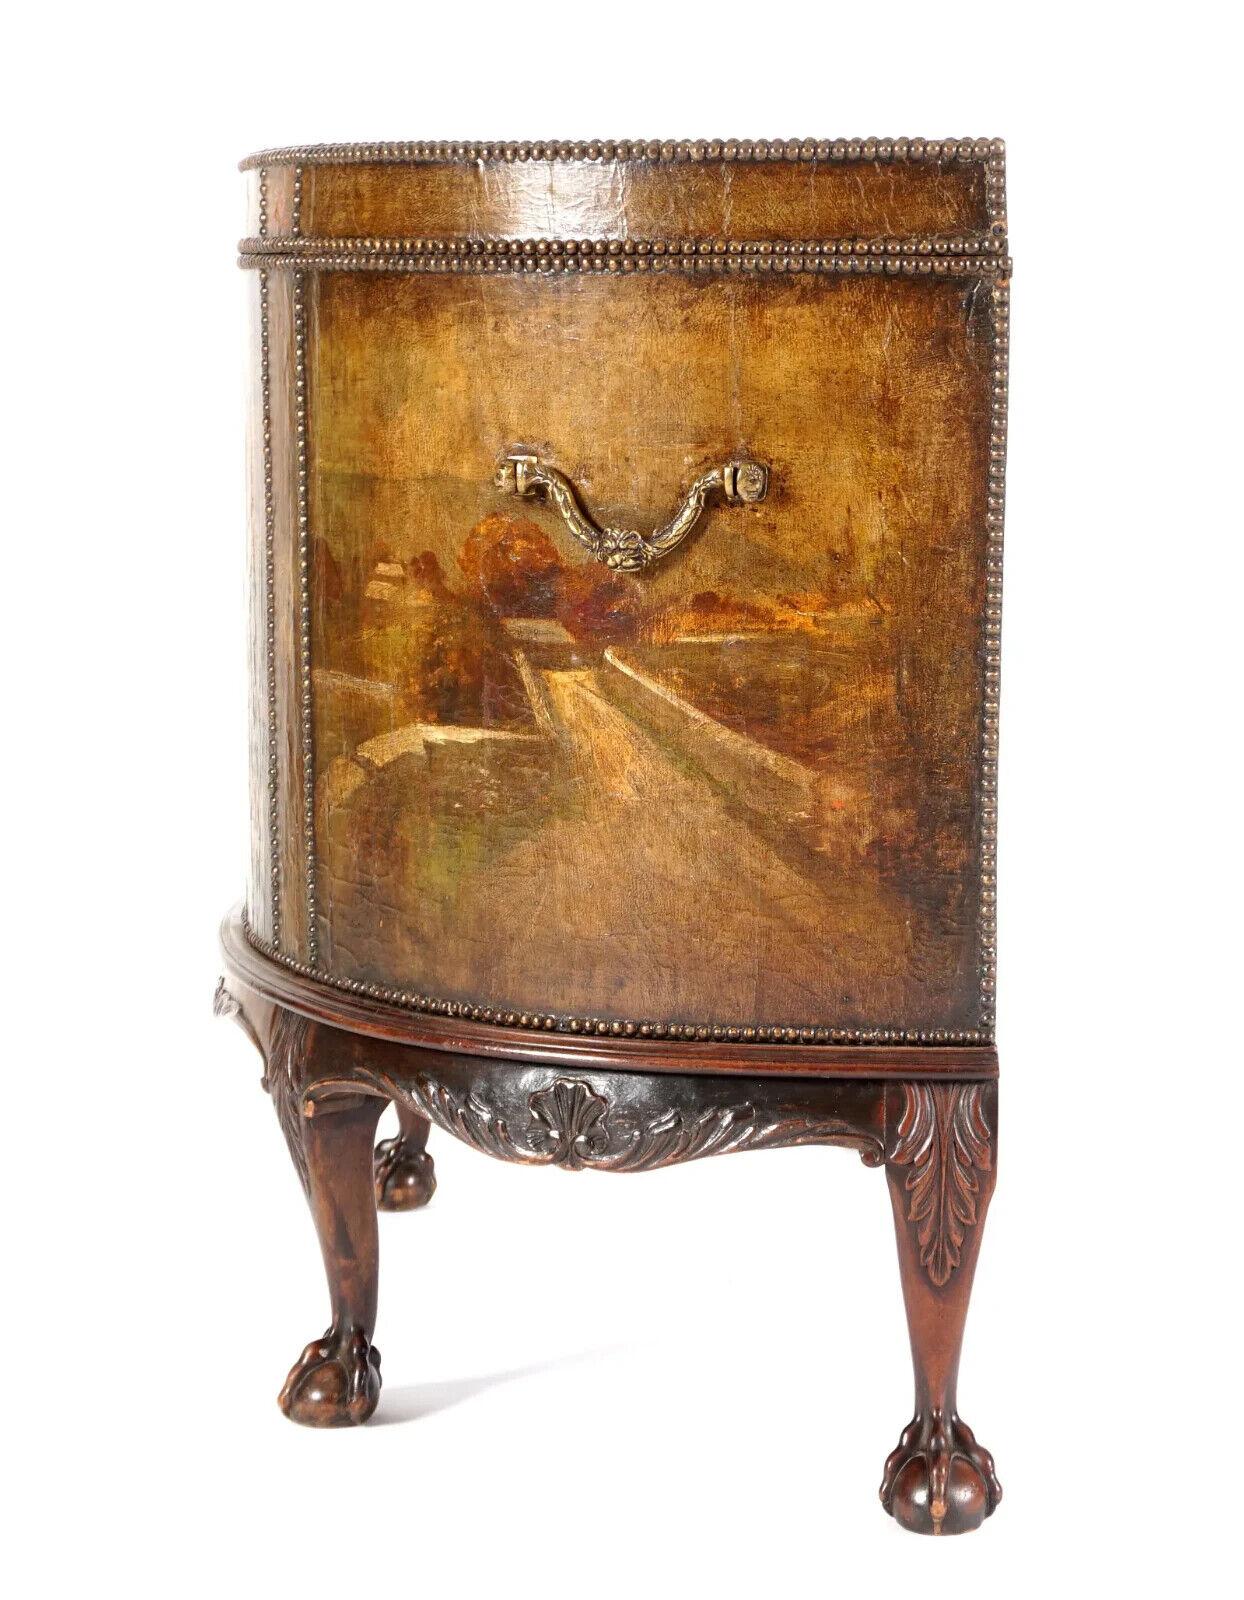 Other 1800s Antique Paint Decorated Scenes, Clad Leather, Brass Hand Demilune Chest! For Sale